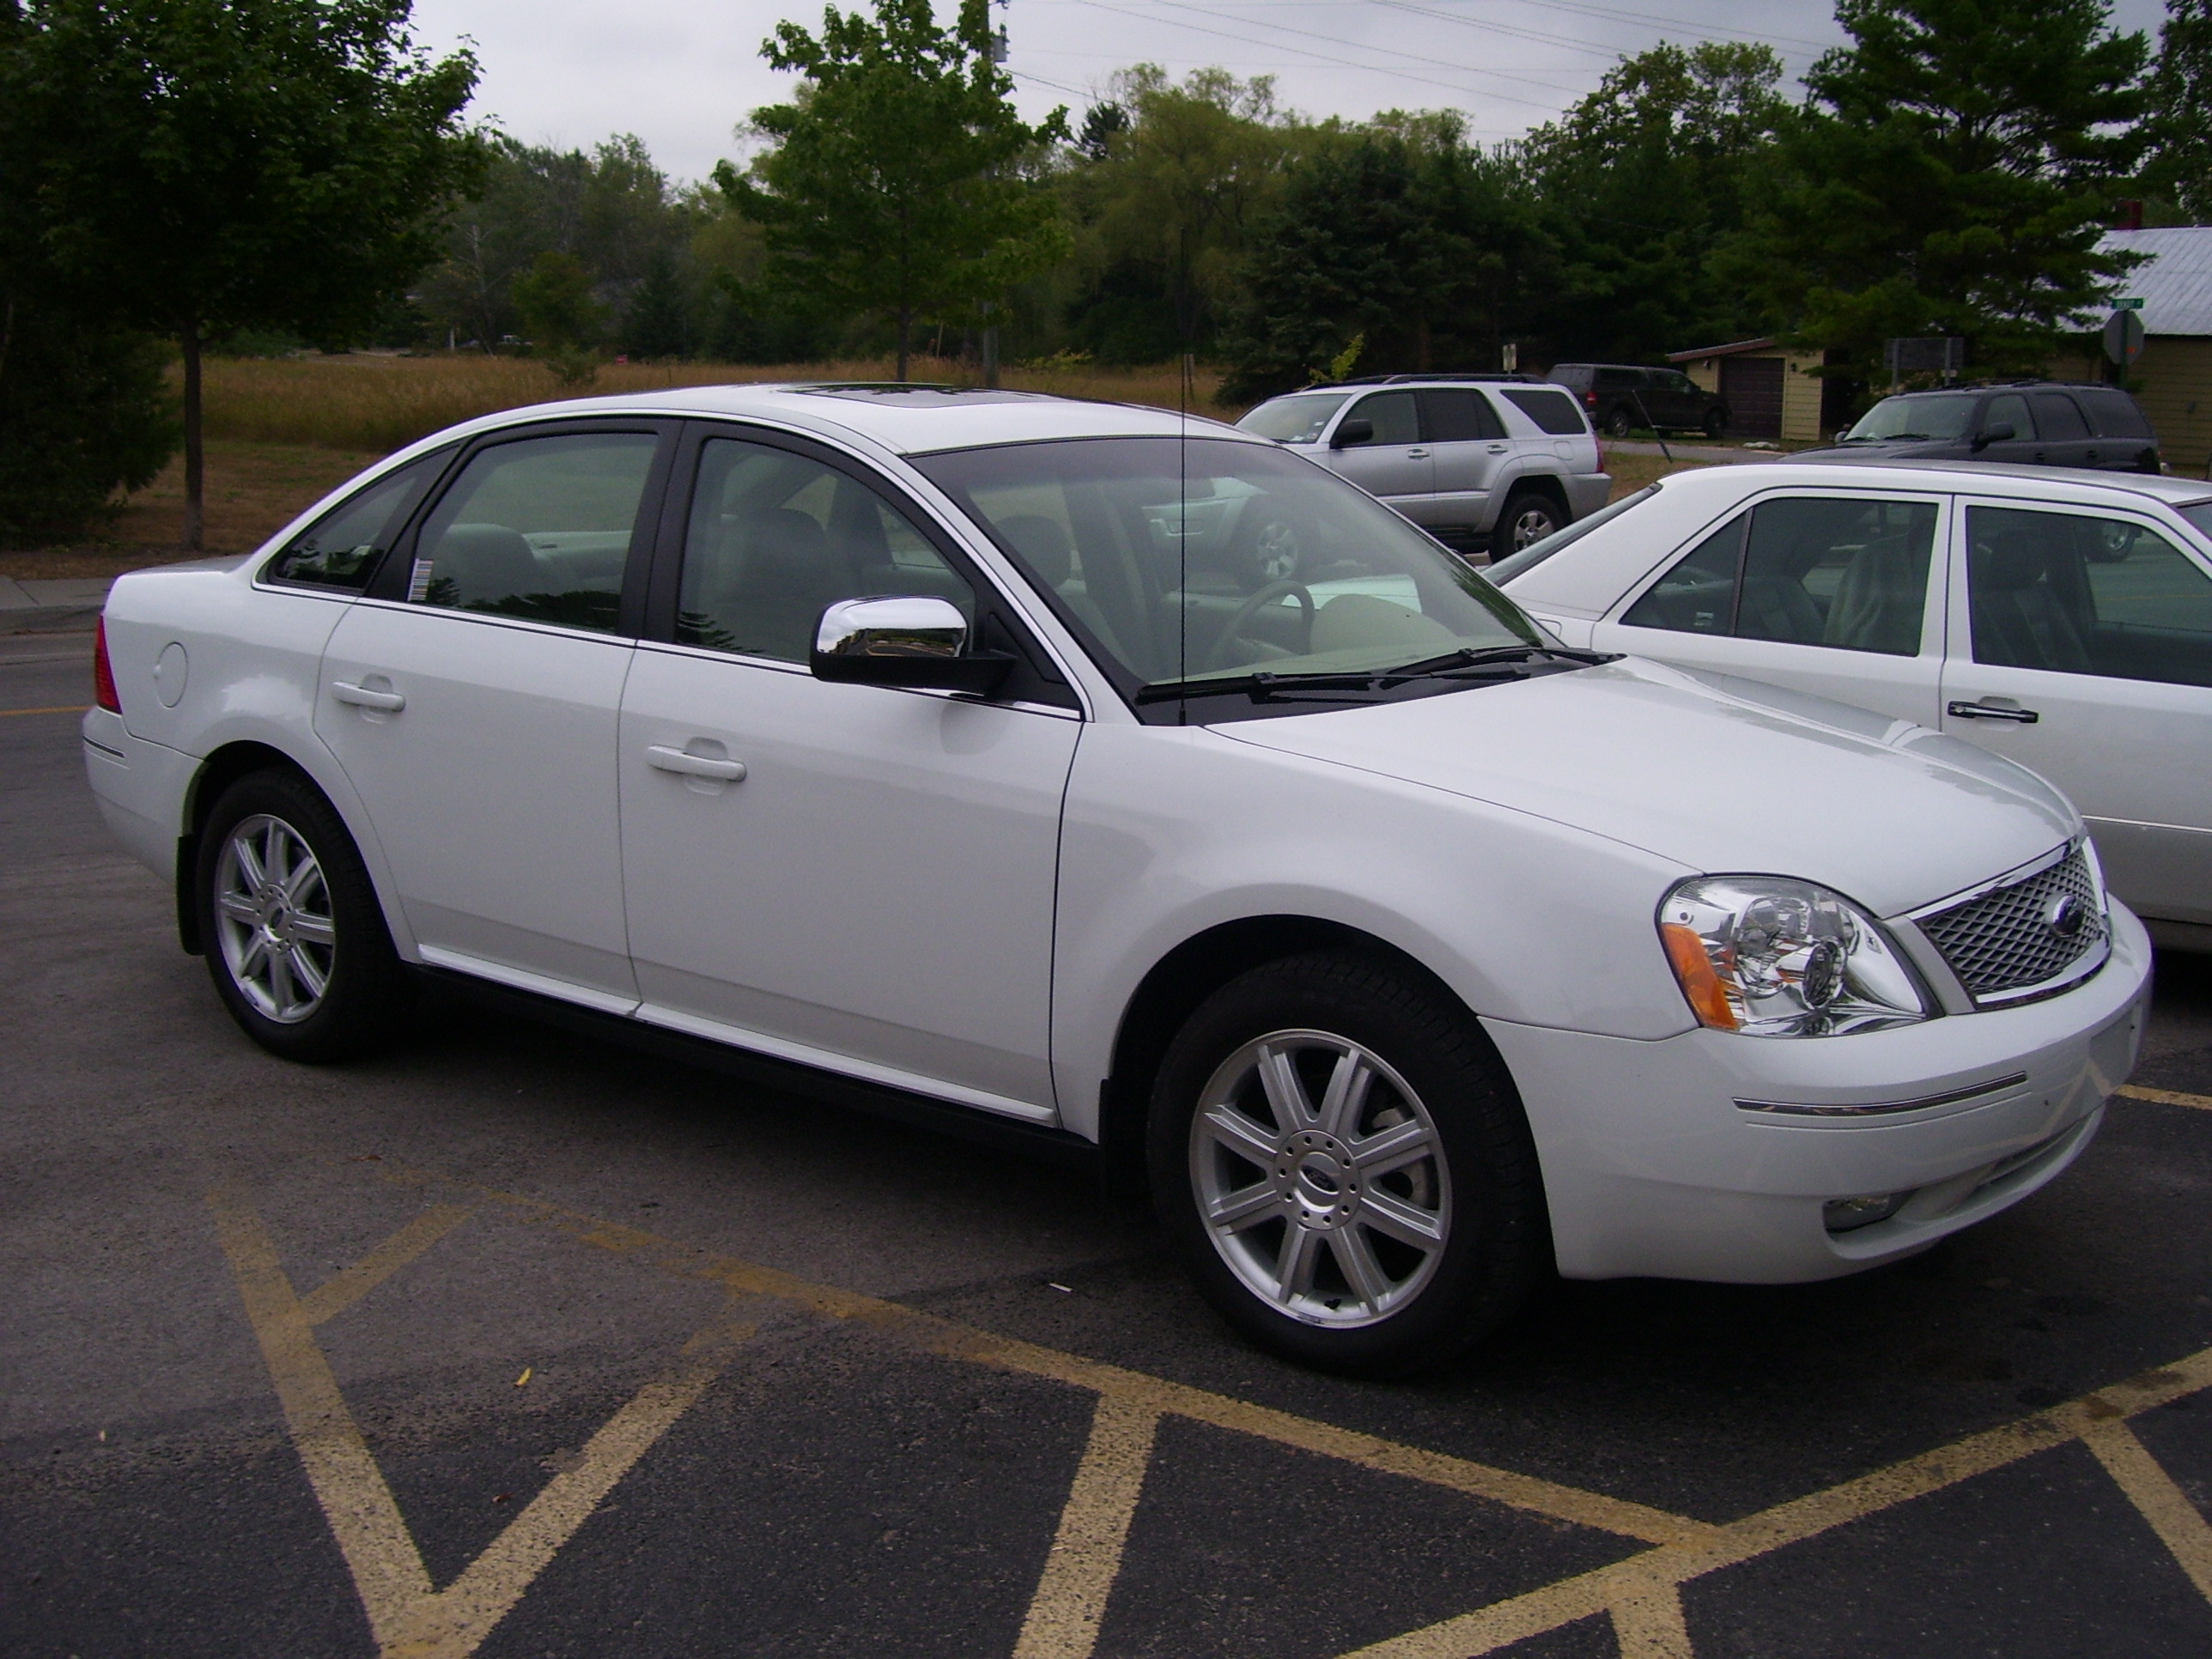 File:Ford Five Hundred 2006.jpg - Wikimedia Commons